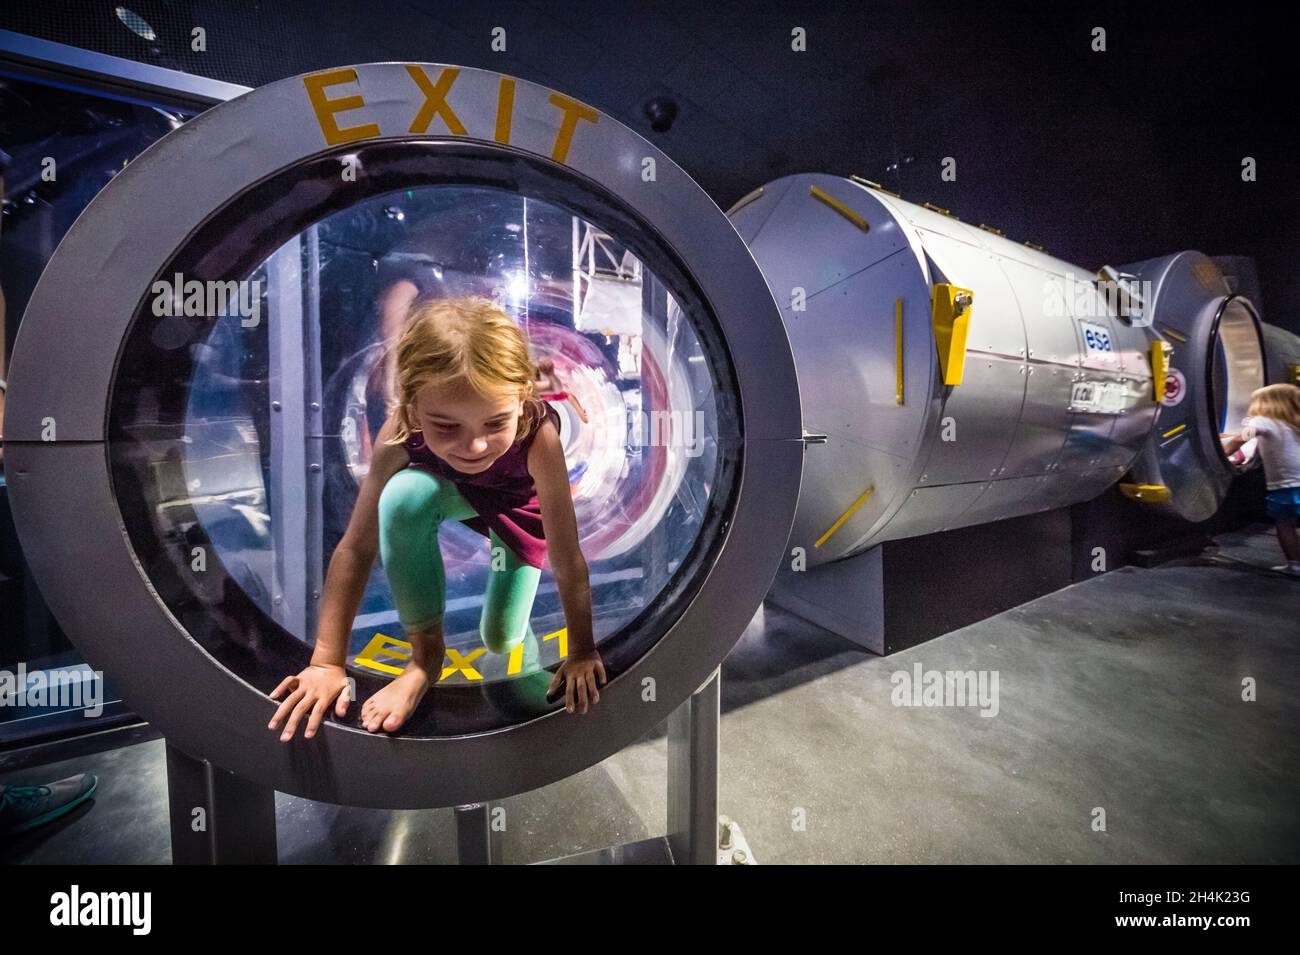 United States, Florida, Orlando, Cape Canaveral, Kennedy Space Center, space museum, child emerging from a space station replica Stock Photo